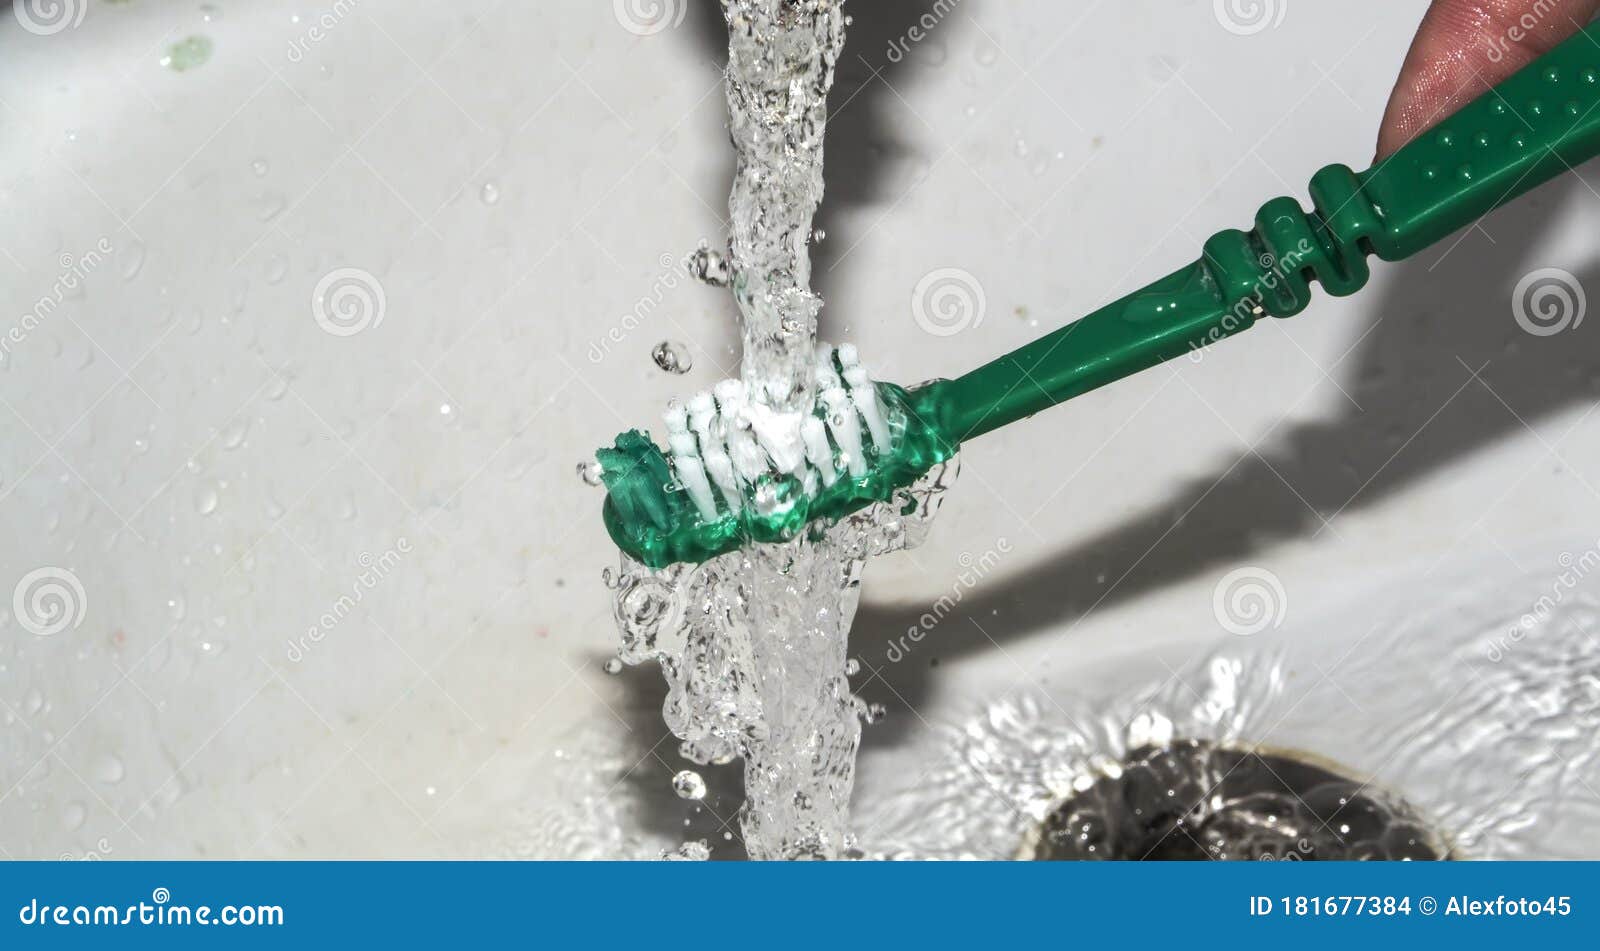 water flushes toothpaste from the brush